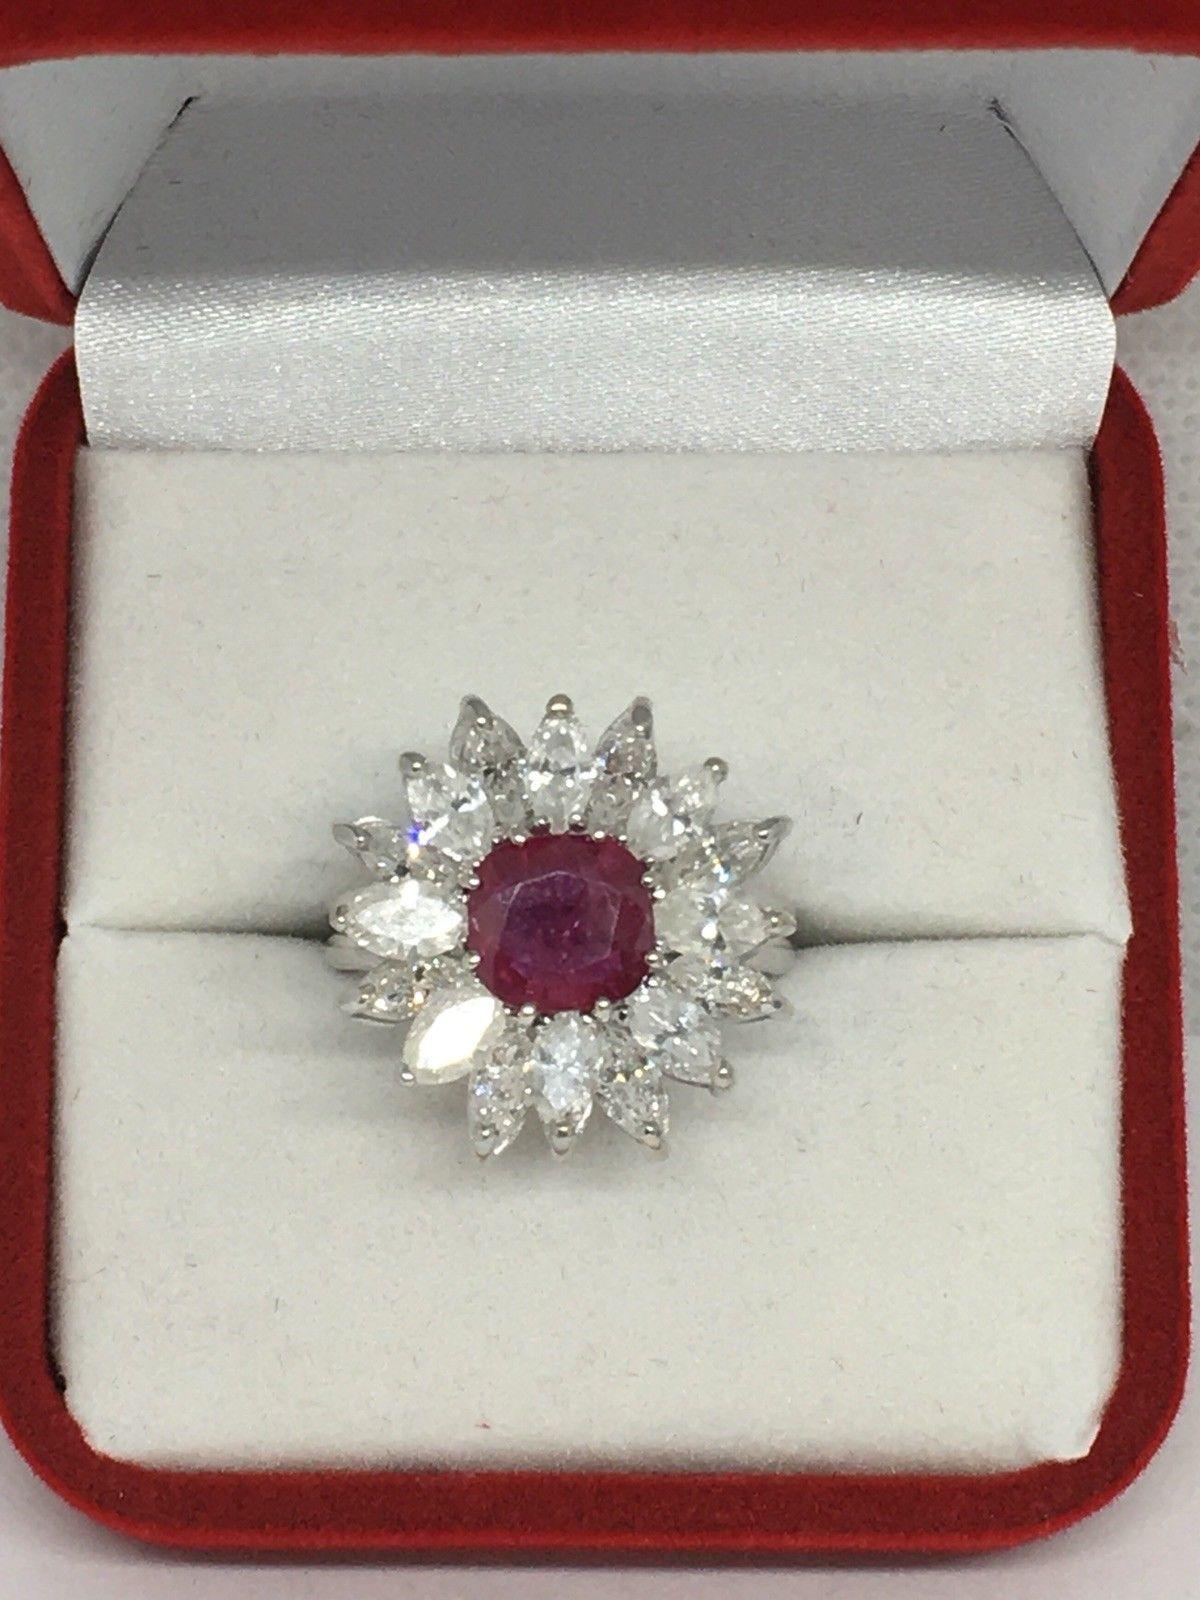 This stunning estate ring is set in 14k white gold with a stunning genuine red cushion cut ruby, total approximate weight of the ruby is 1.80 carats.

Surrounding the ruby in a flower style halo are over 2.50 carats of beautiful large white marquis